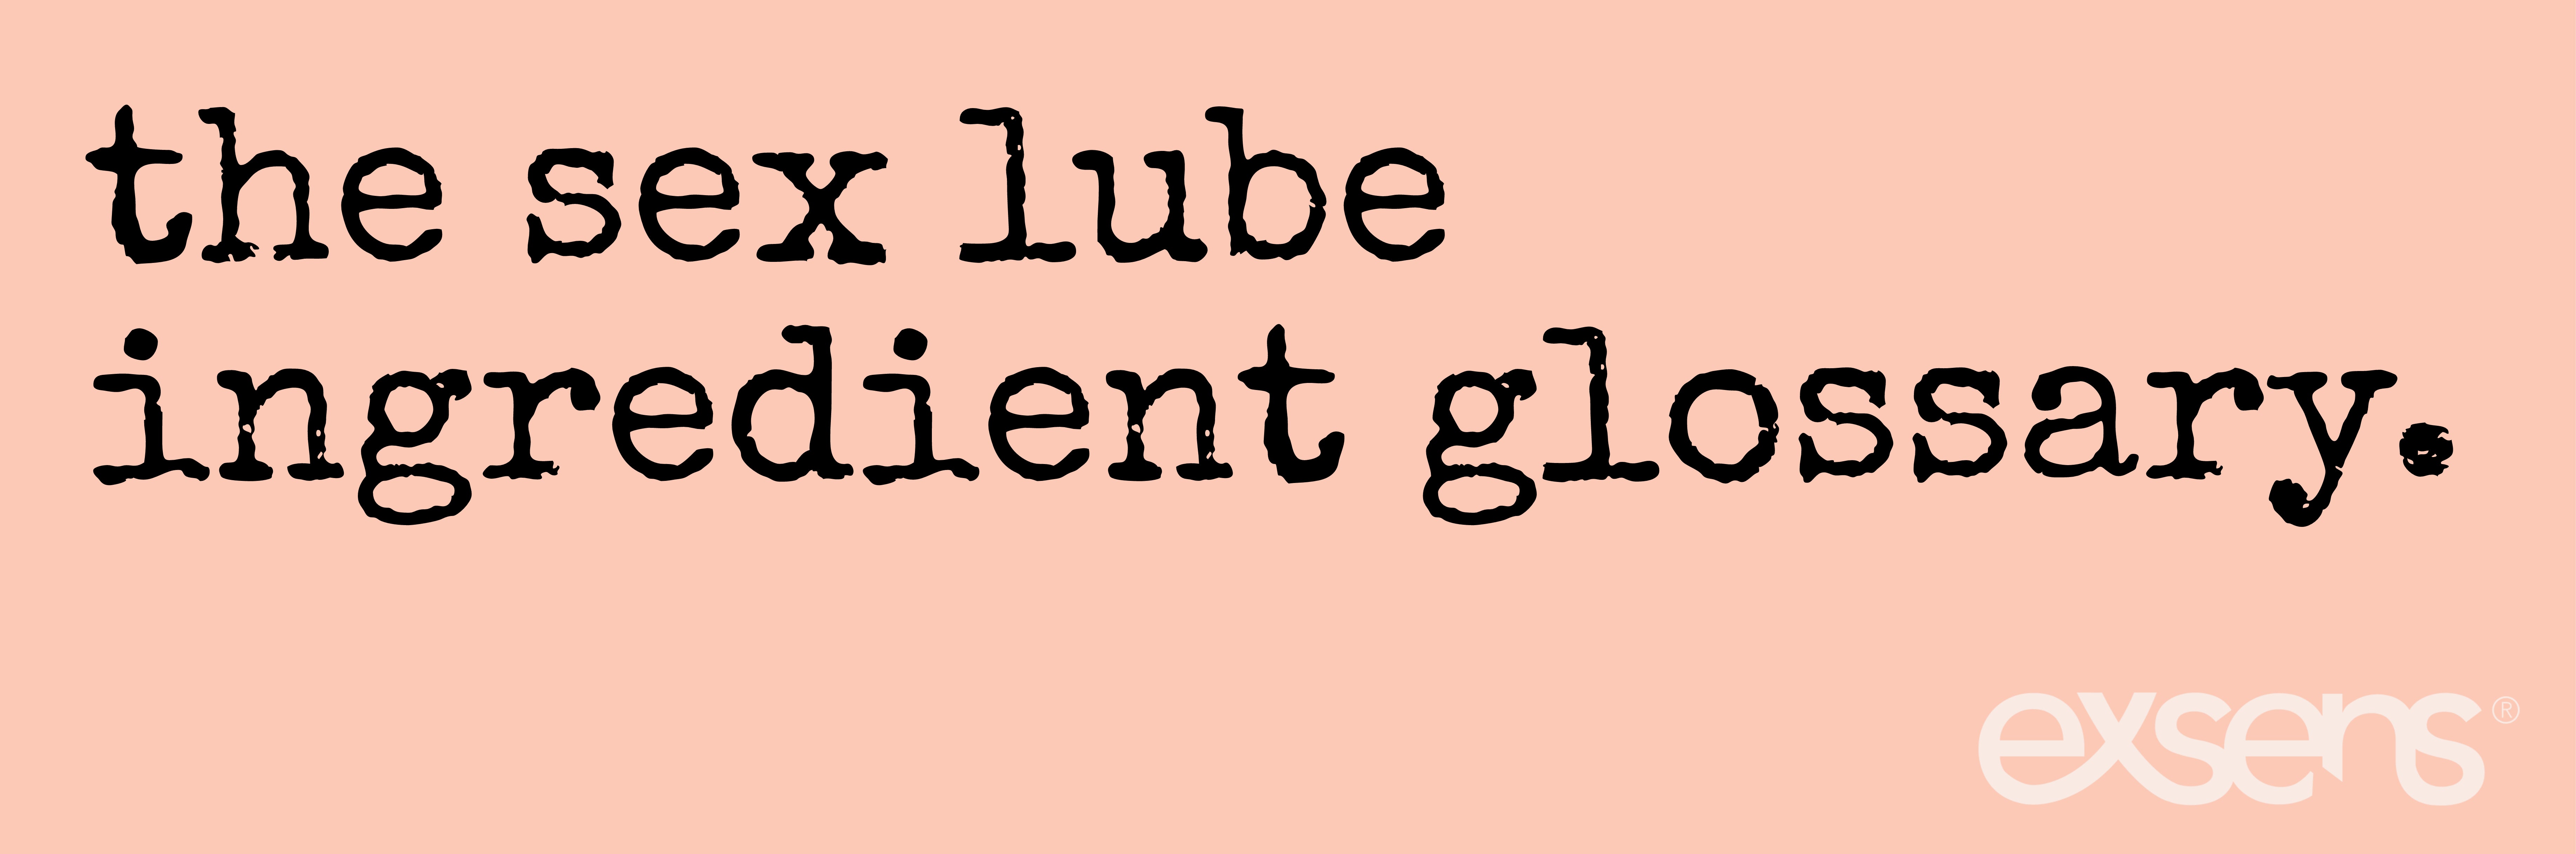 Lube Lessons 3 The Sex Lube Ingredient Glossary pic